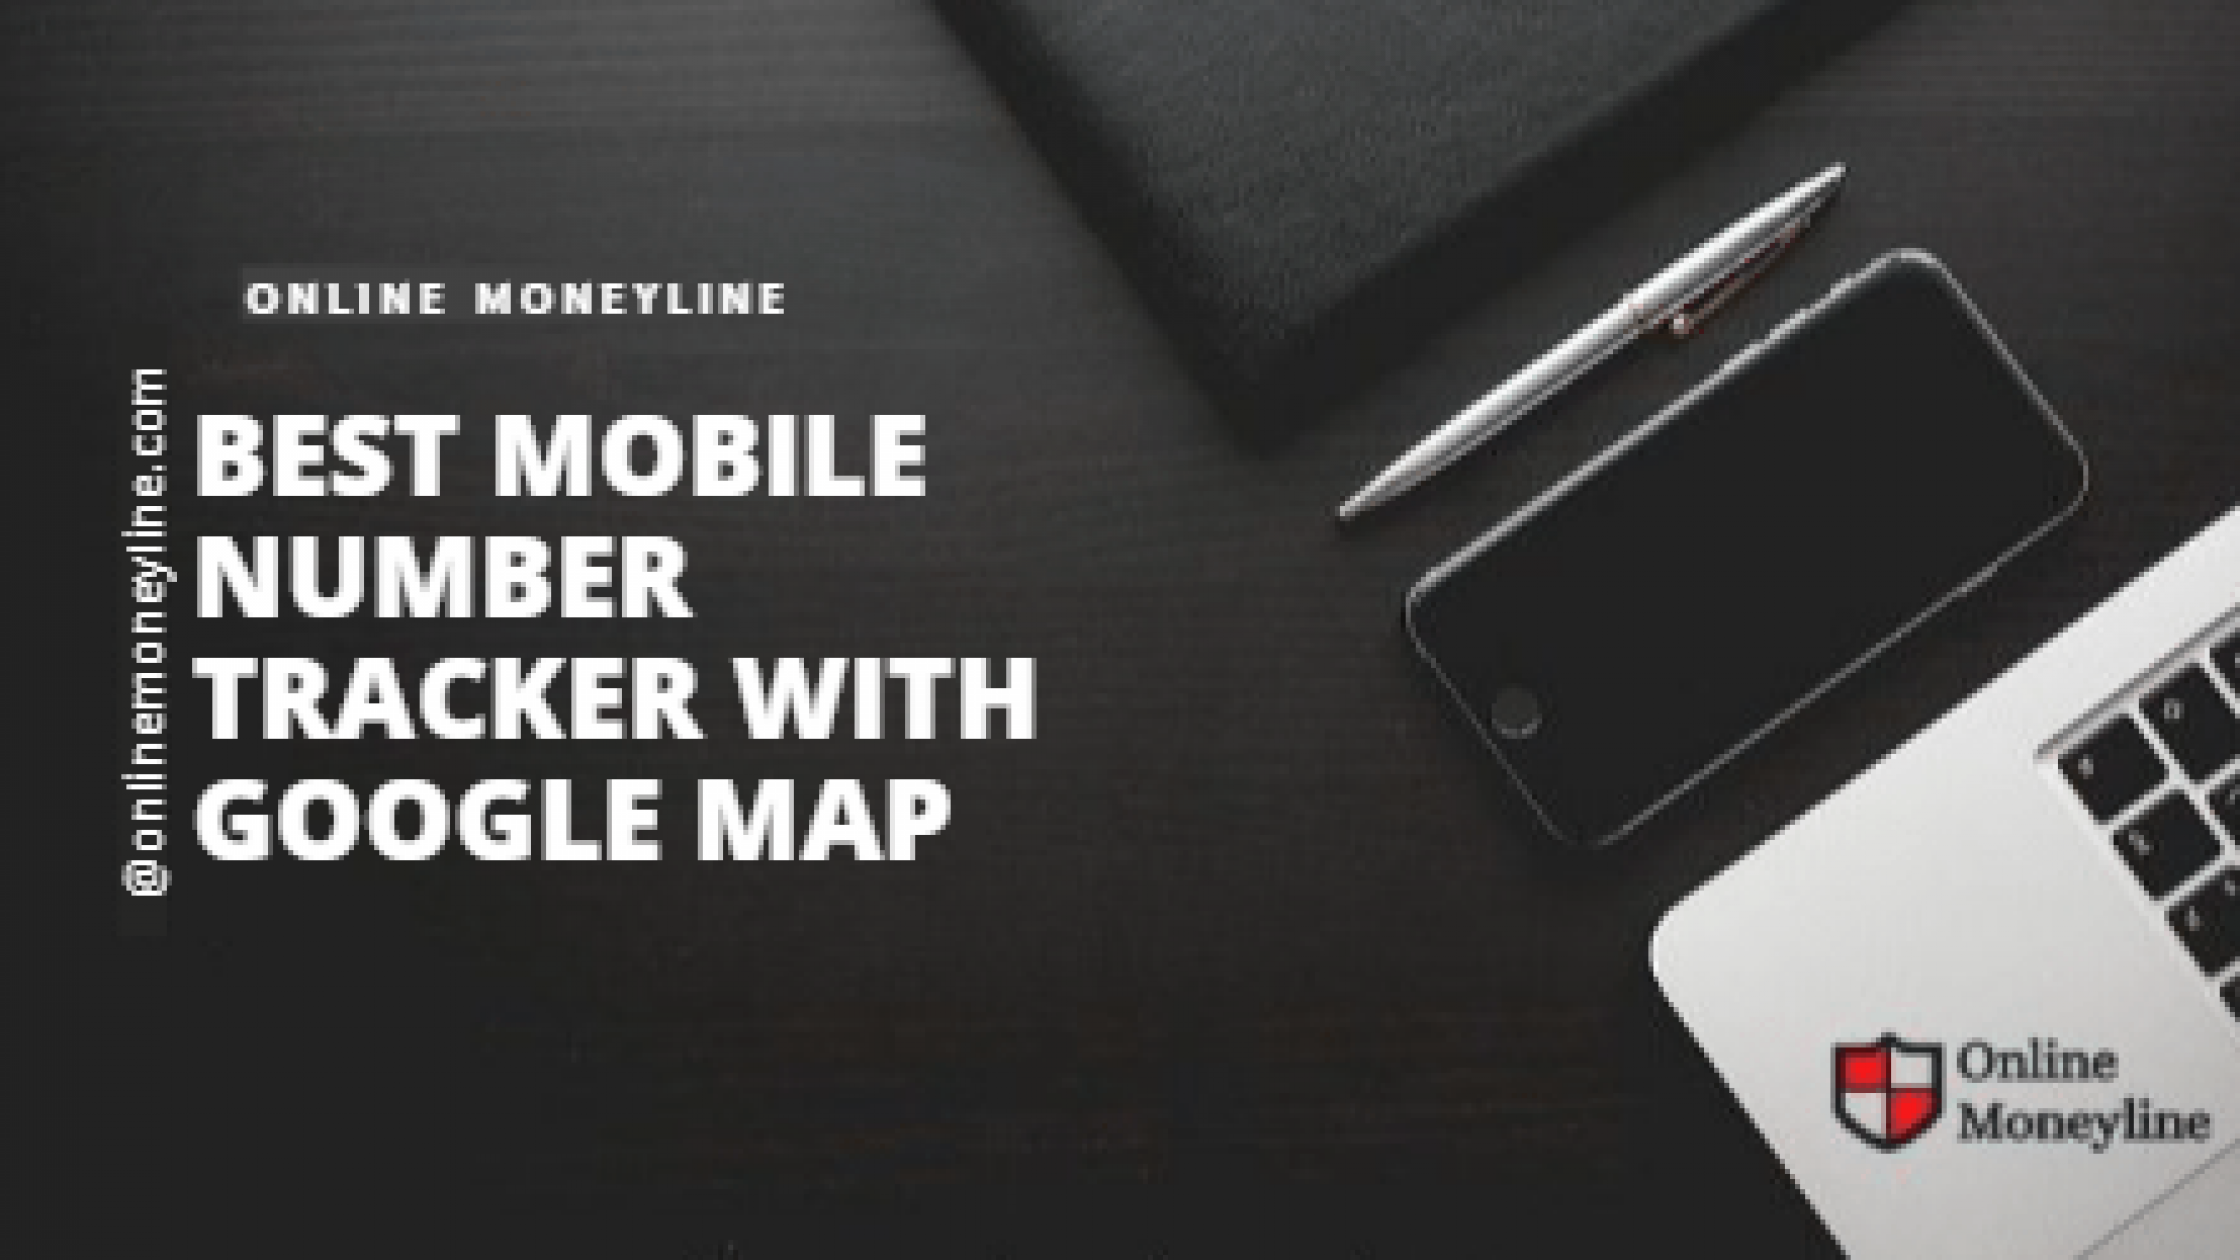 Best Mobile Number Tracker With Google Map